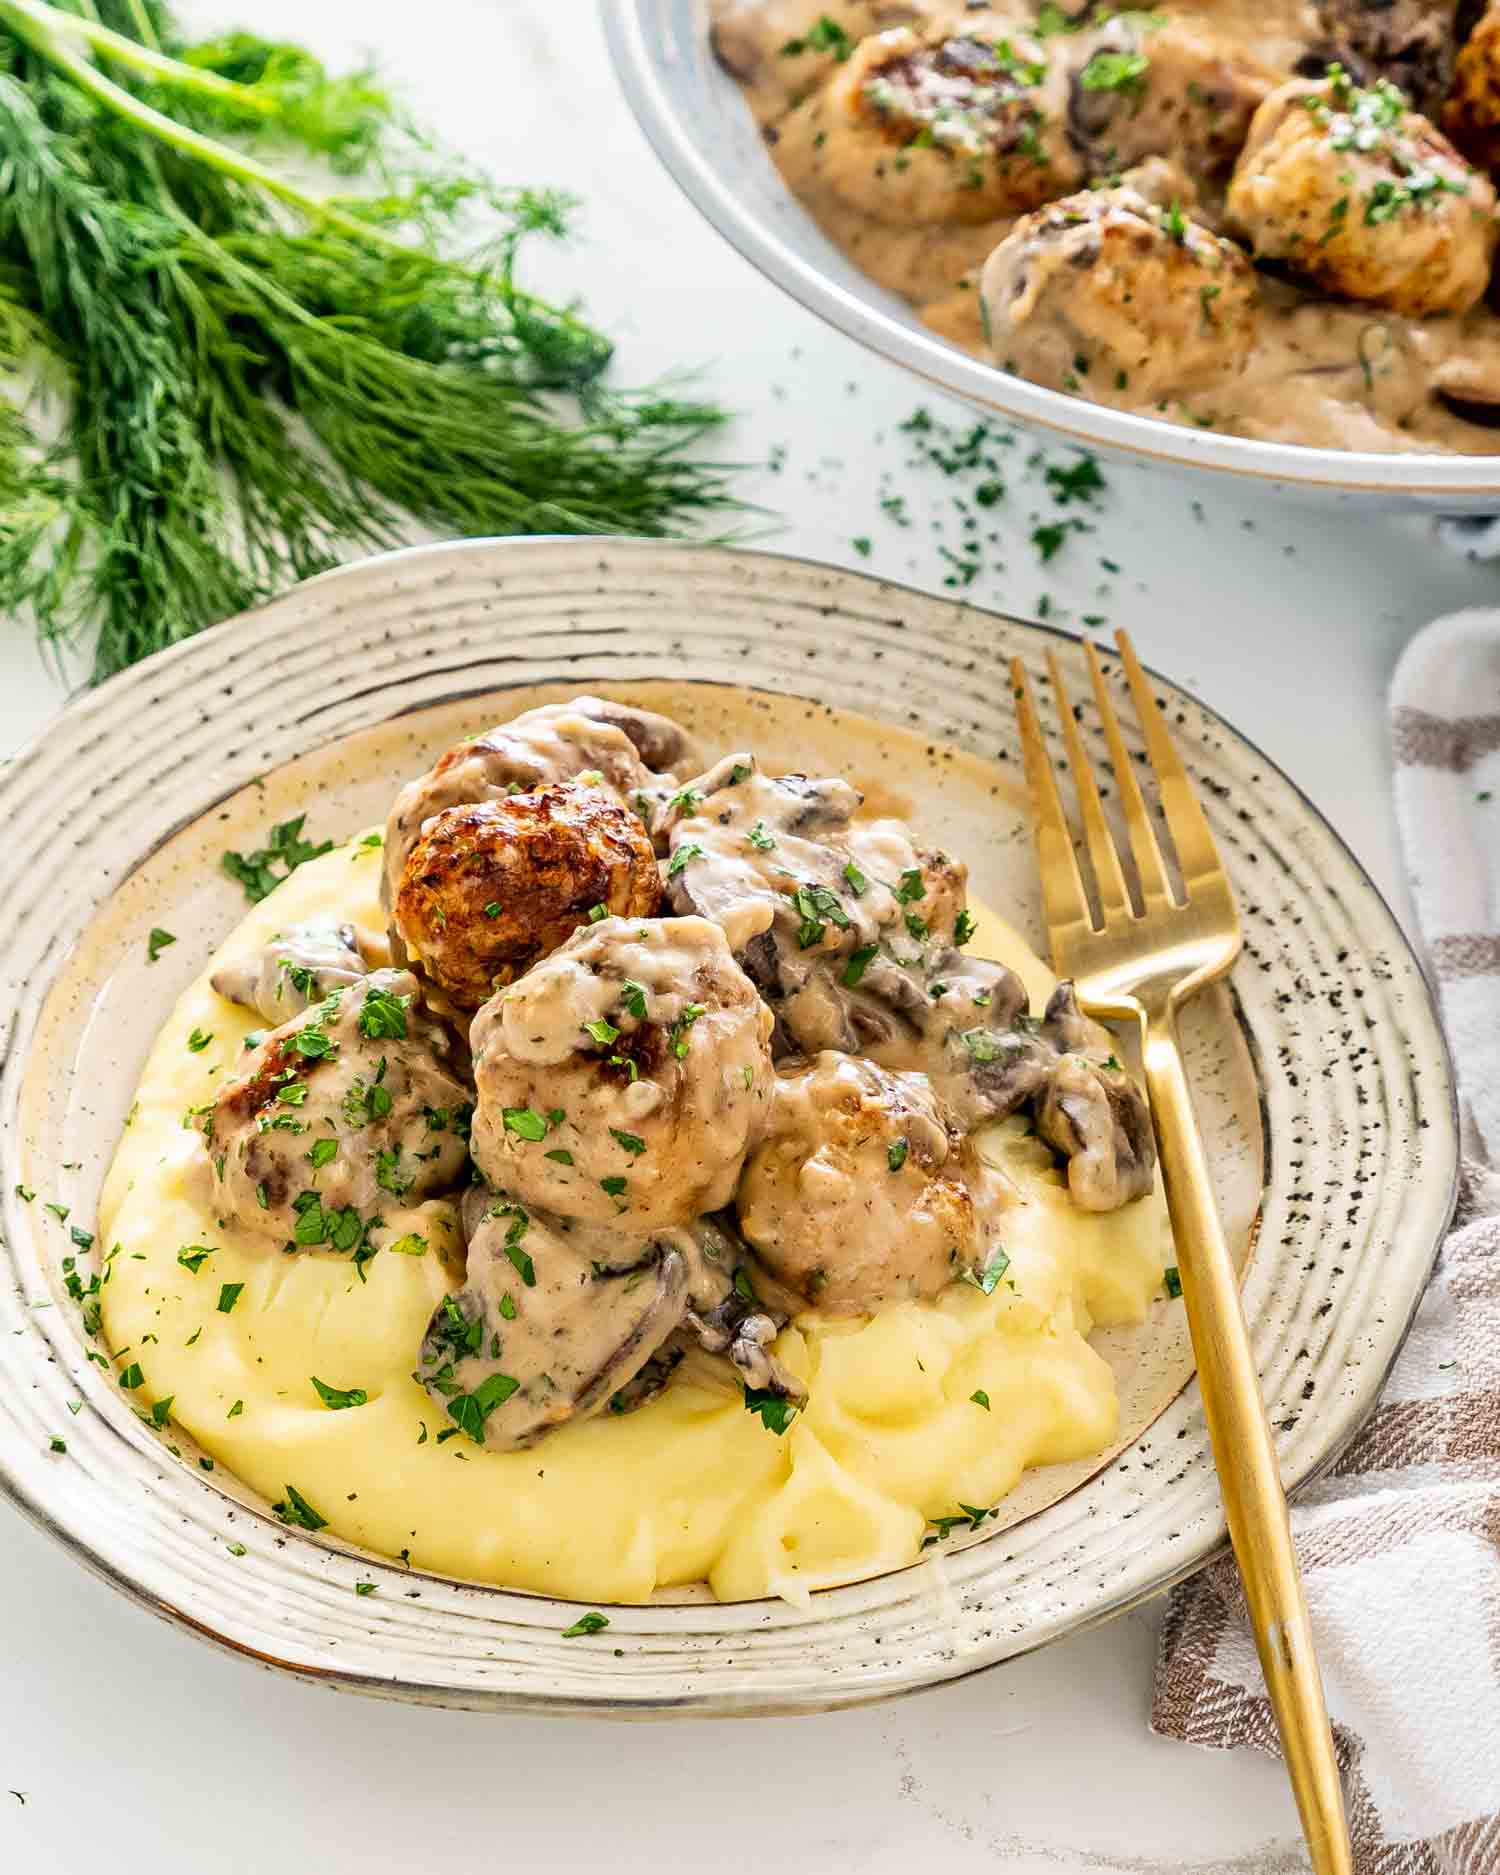 meatballs with mushroom gravy over a bed of mashed potatoes.